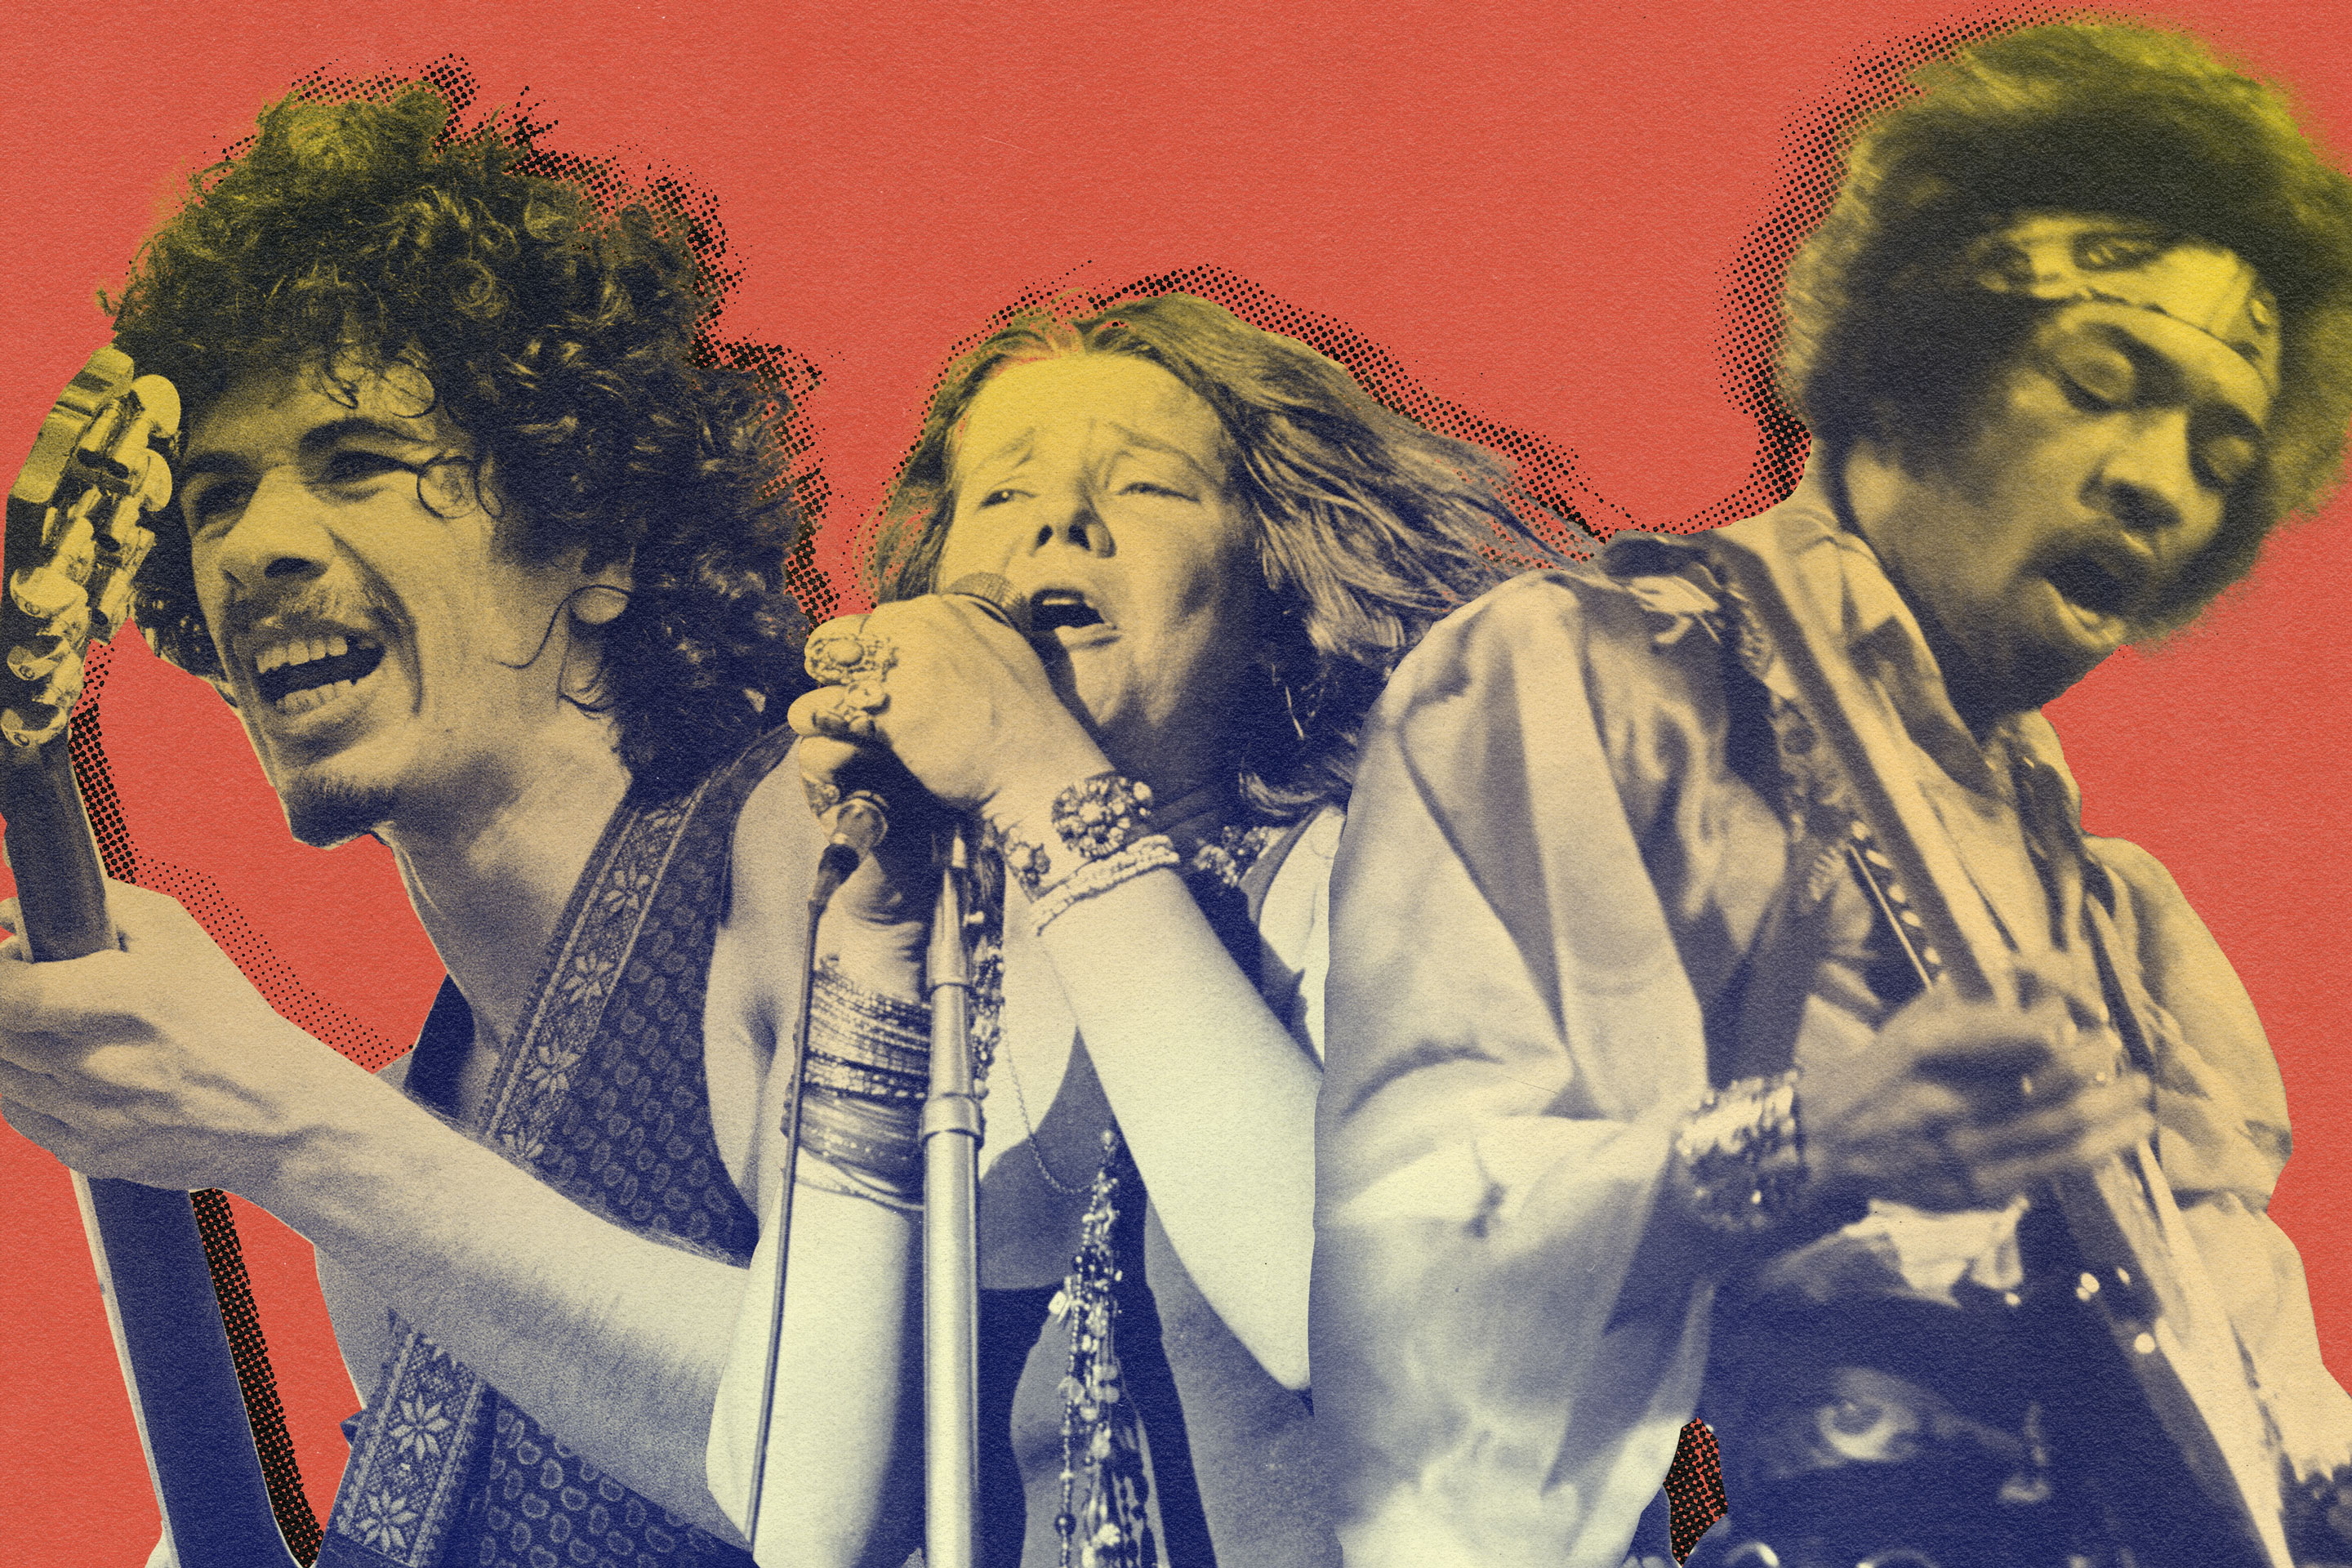 Woodstock 1969: How Much Money Did Performers Make?